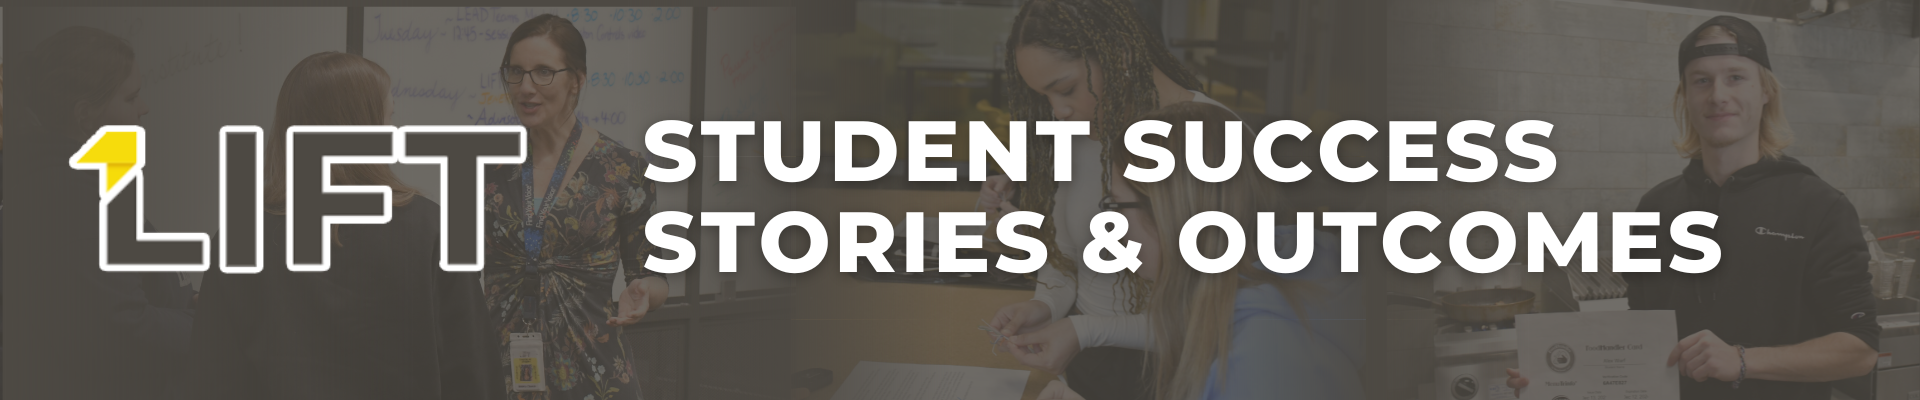 LIFT Student Success Stories & Outcomes